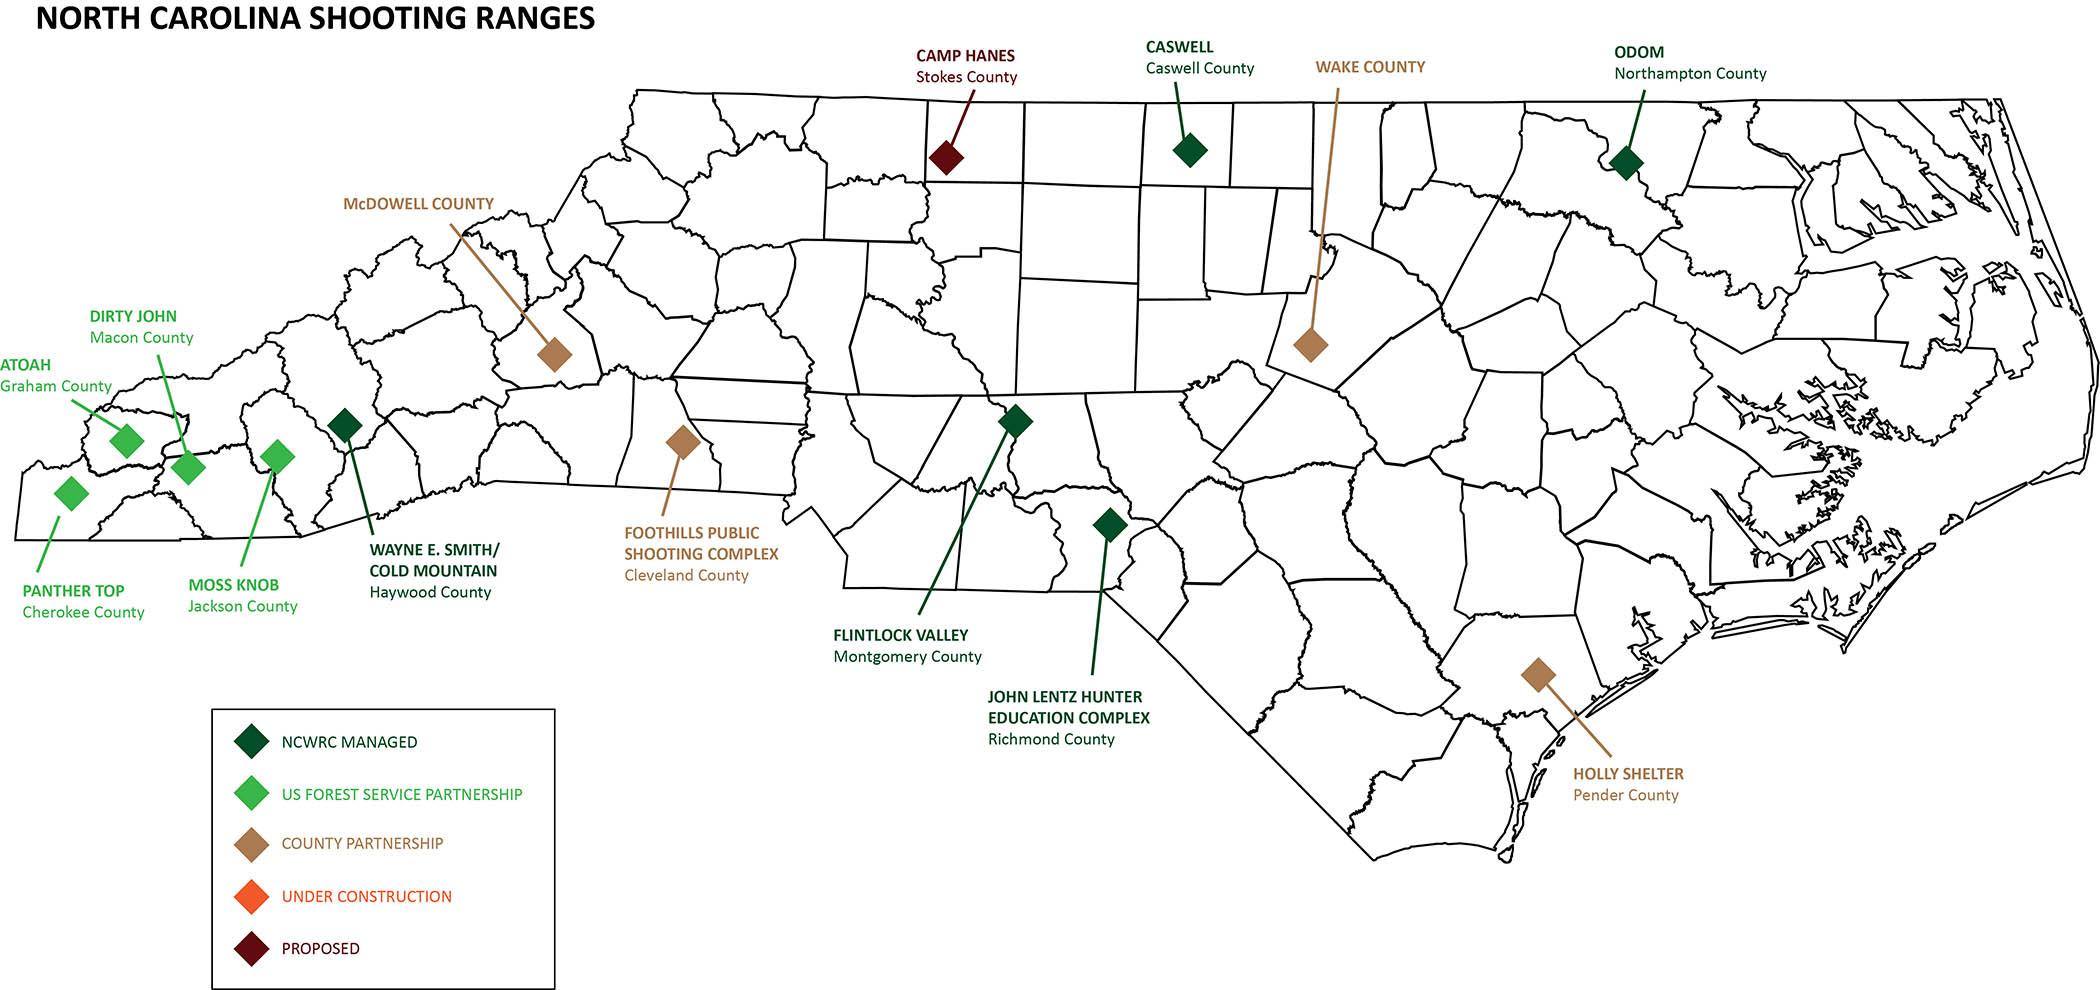 Map of North Carolina Showing Shooting Ranges by County